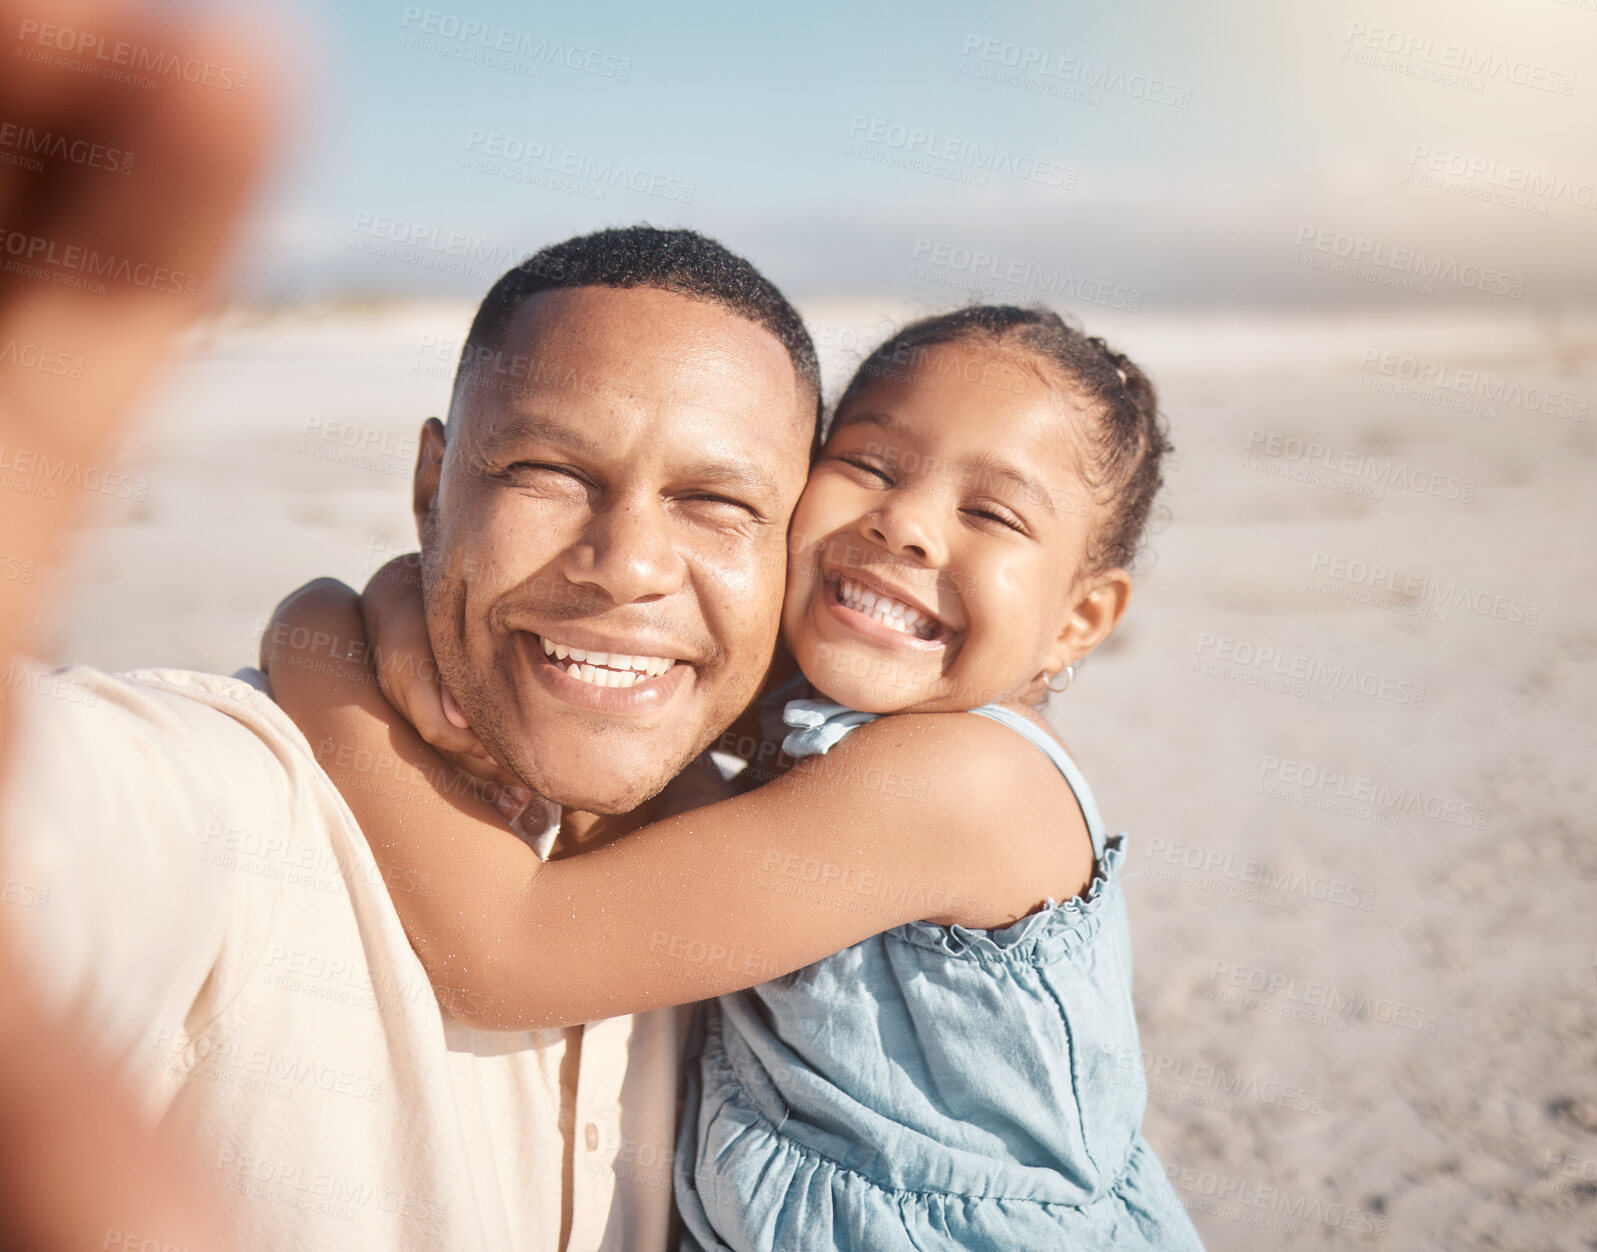 Buy stock photo Smiling mixed race single father taking selfie with little affectionate daughter on beach. Adorable, happy, hispanic girl bonding and hugging parent. Man and child enjoying free time together outside